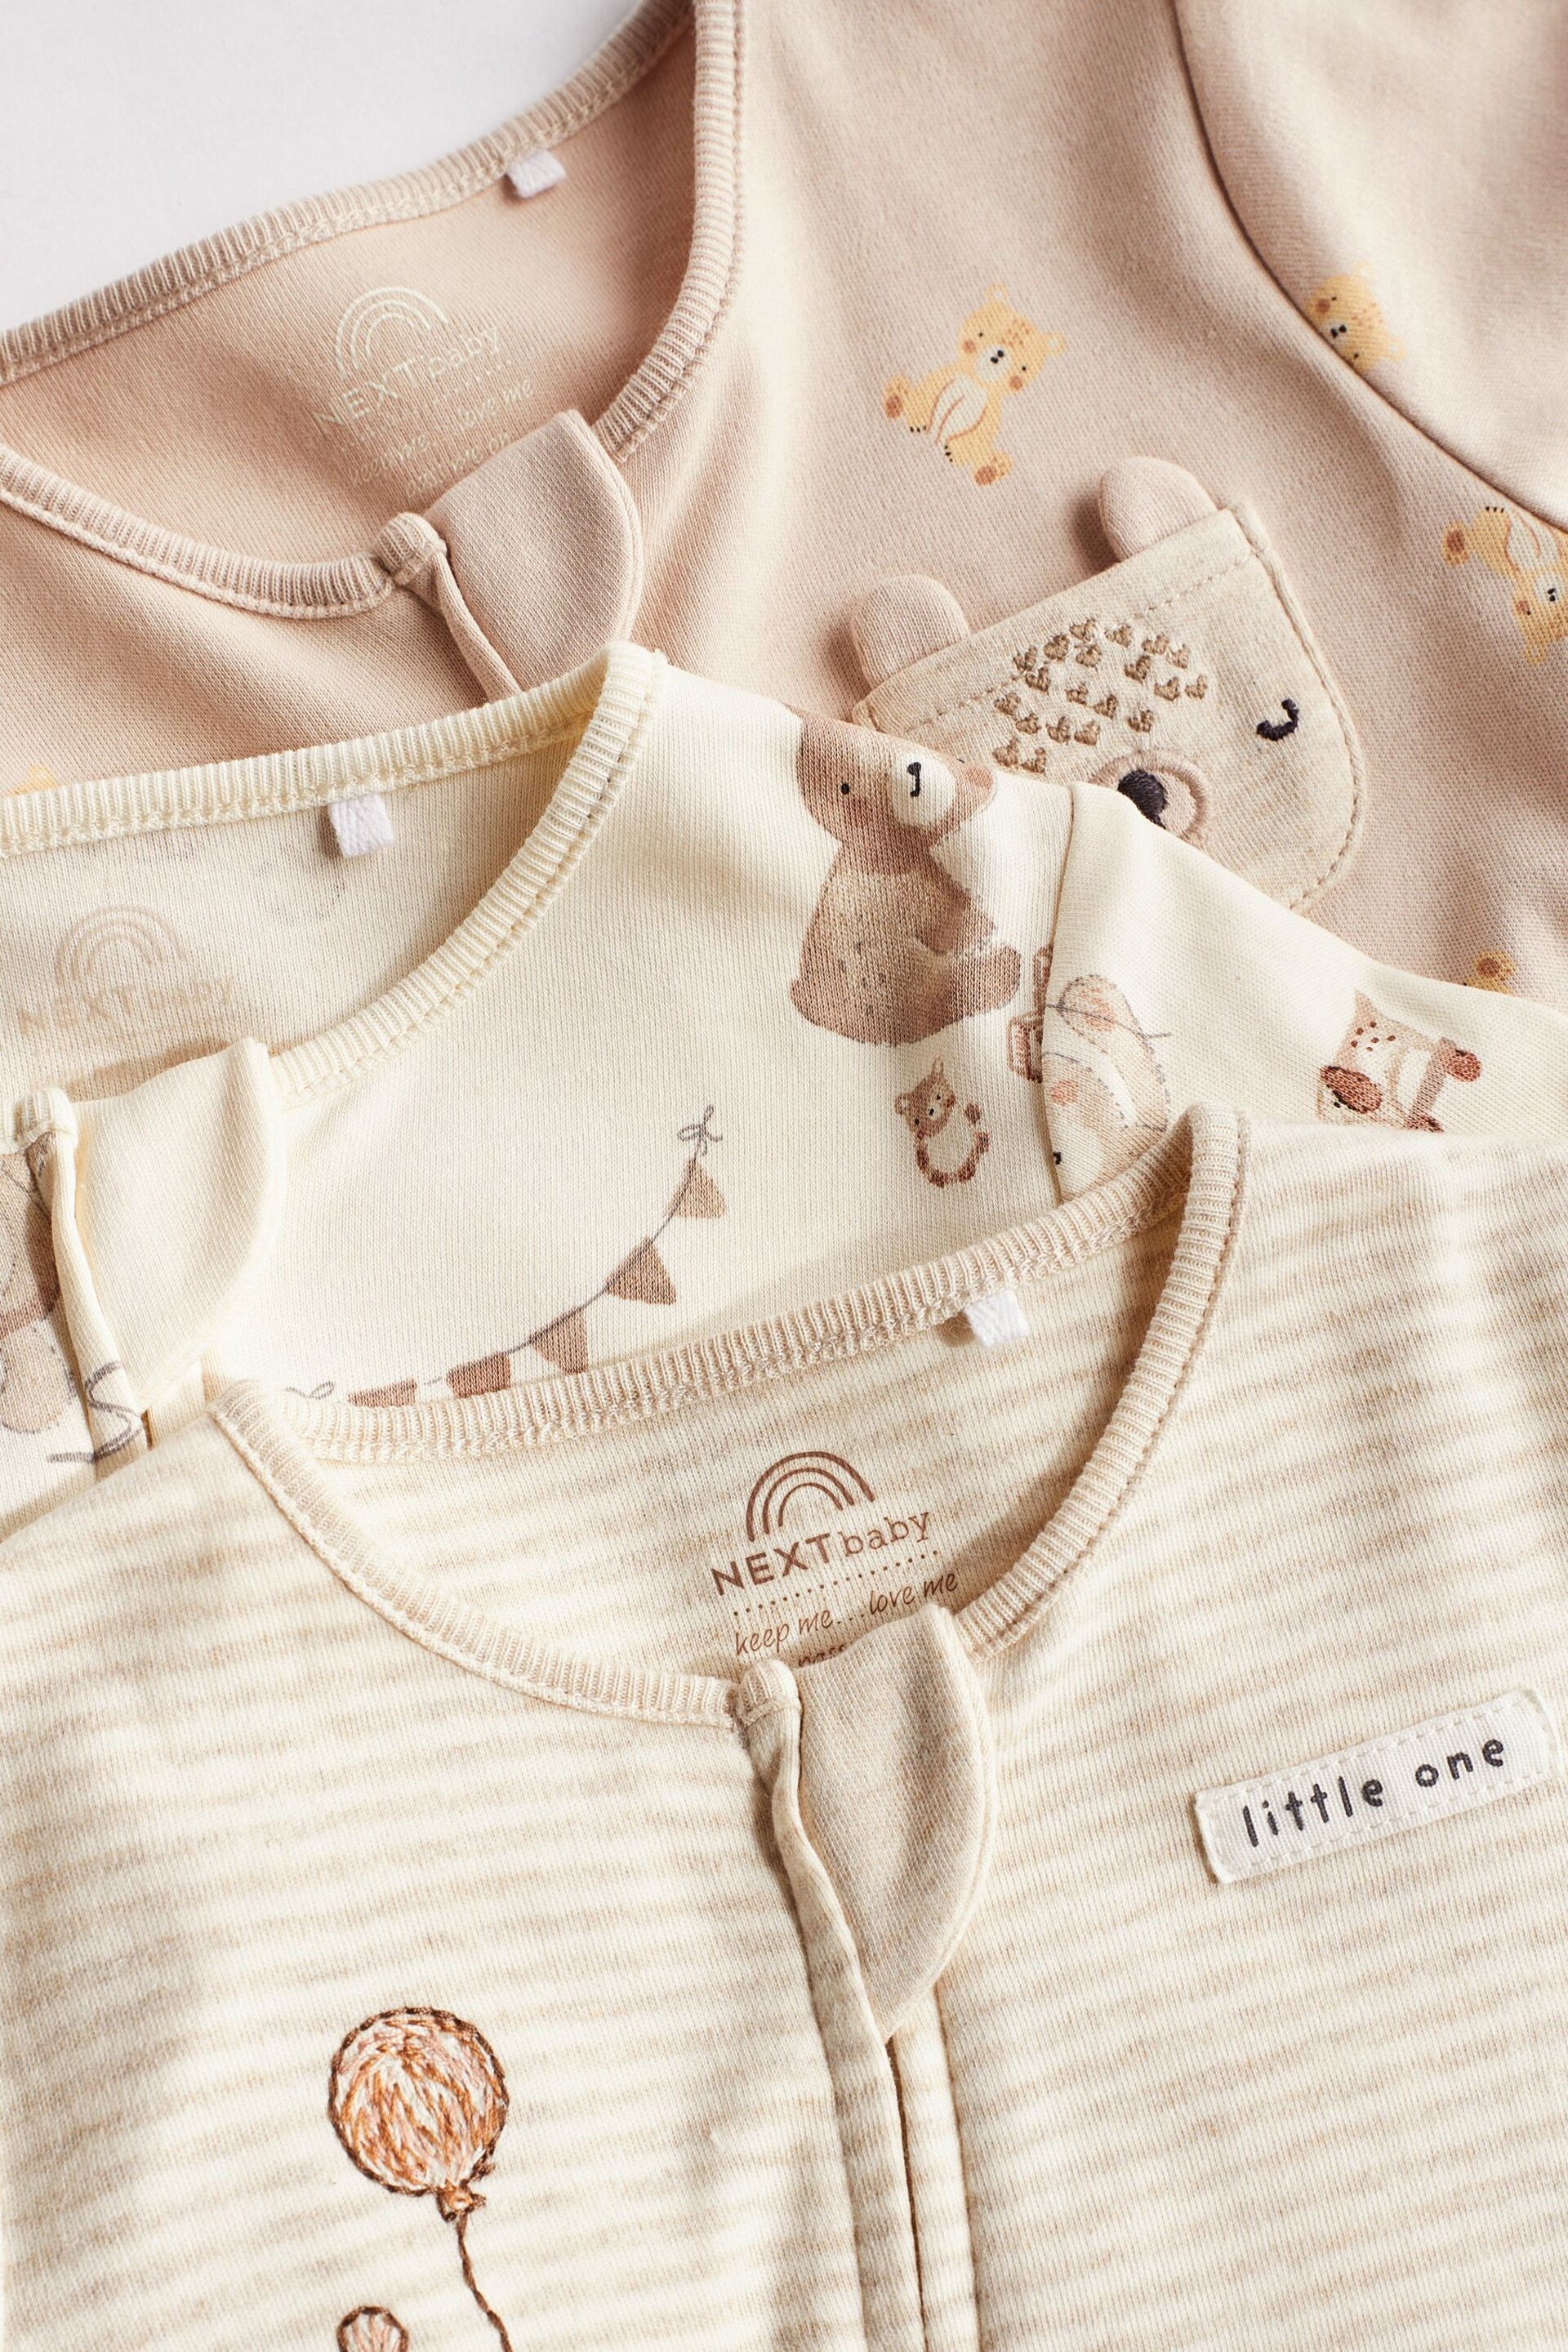 Oatmeal Cream Baby Sleepsuits 3 Pack (0mths-3yrs) - Image 9 of 12